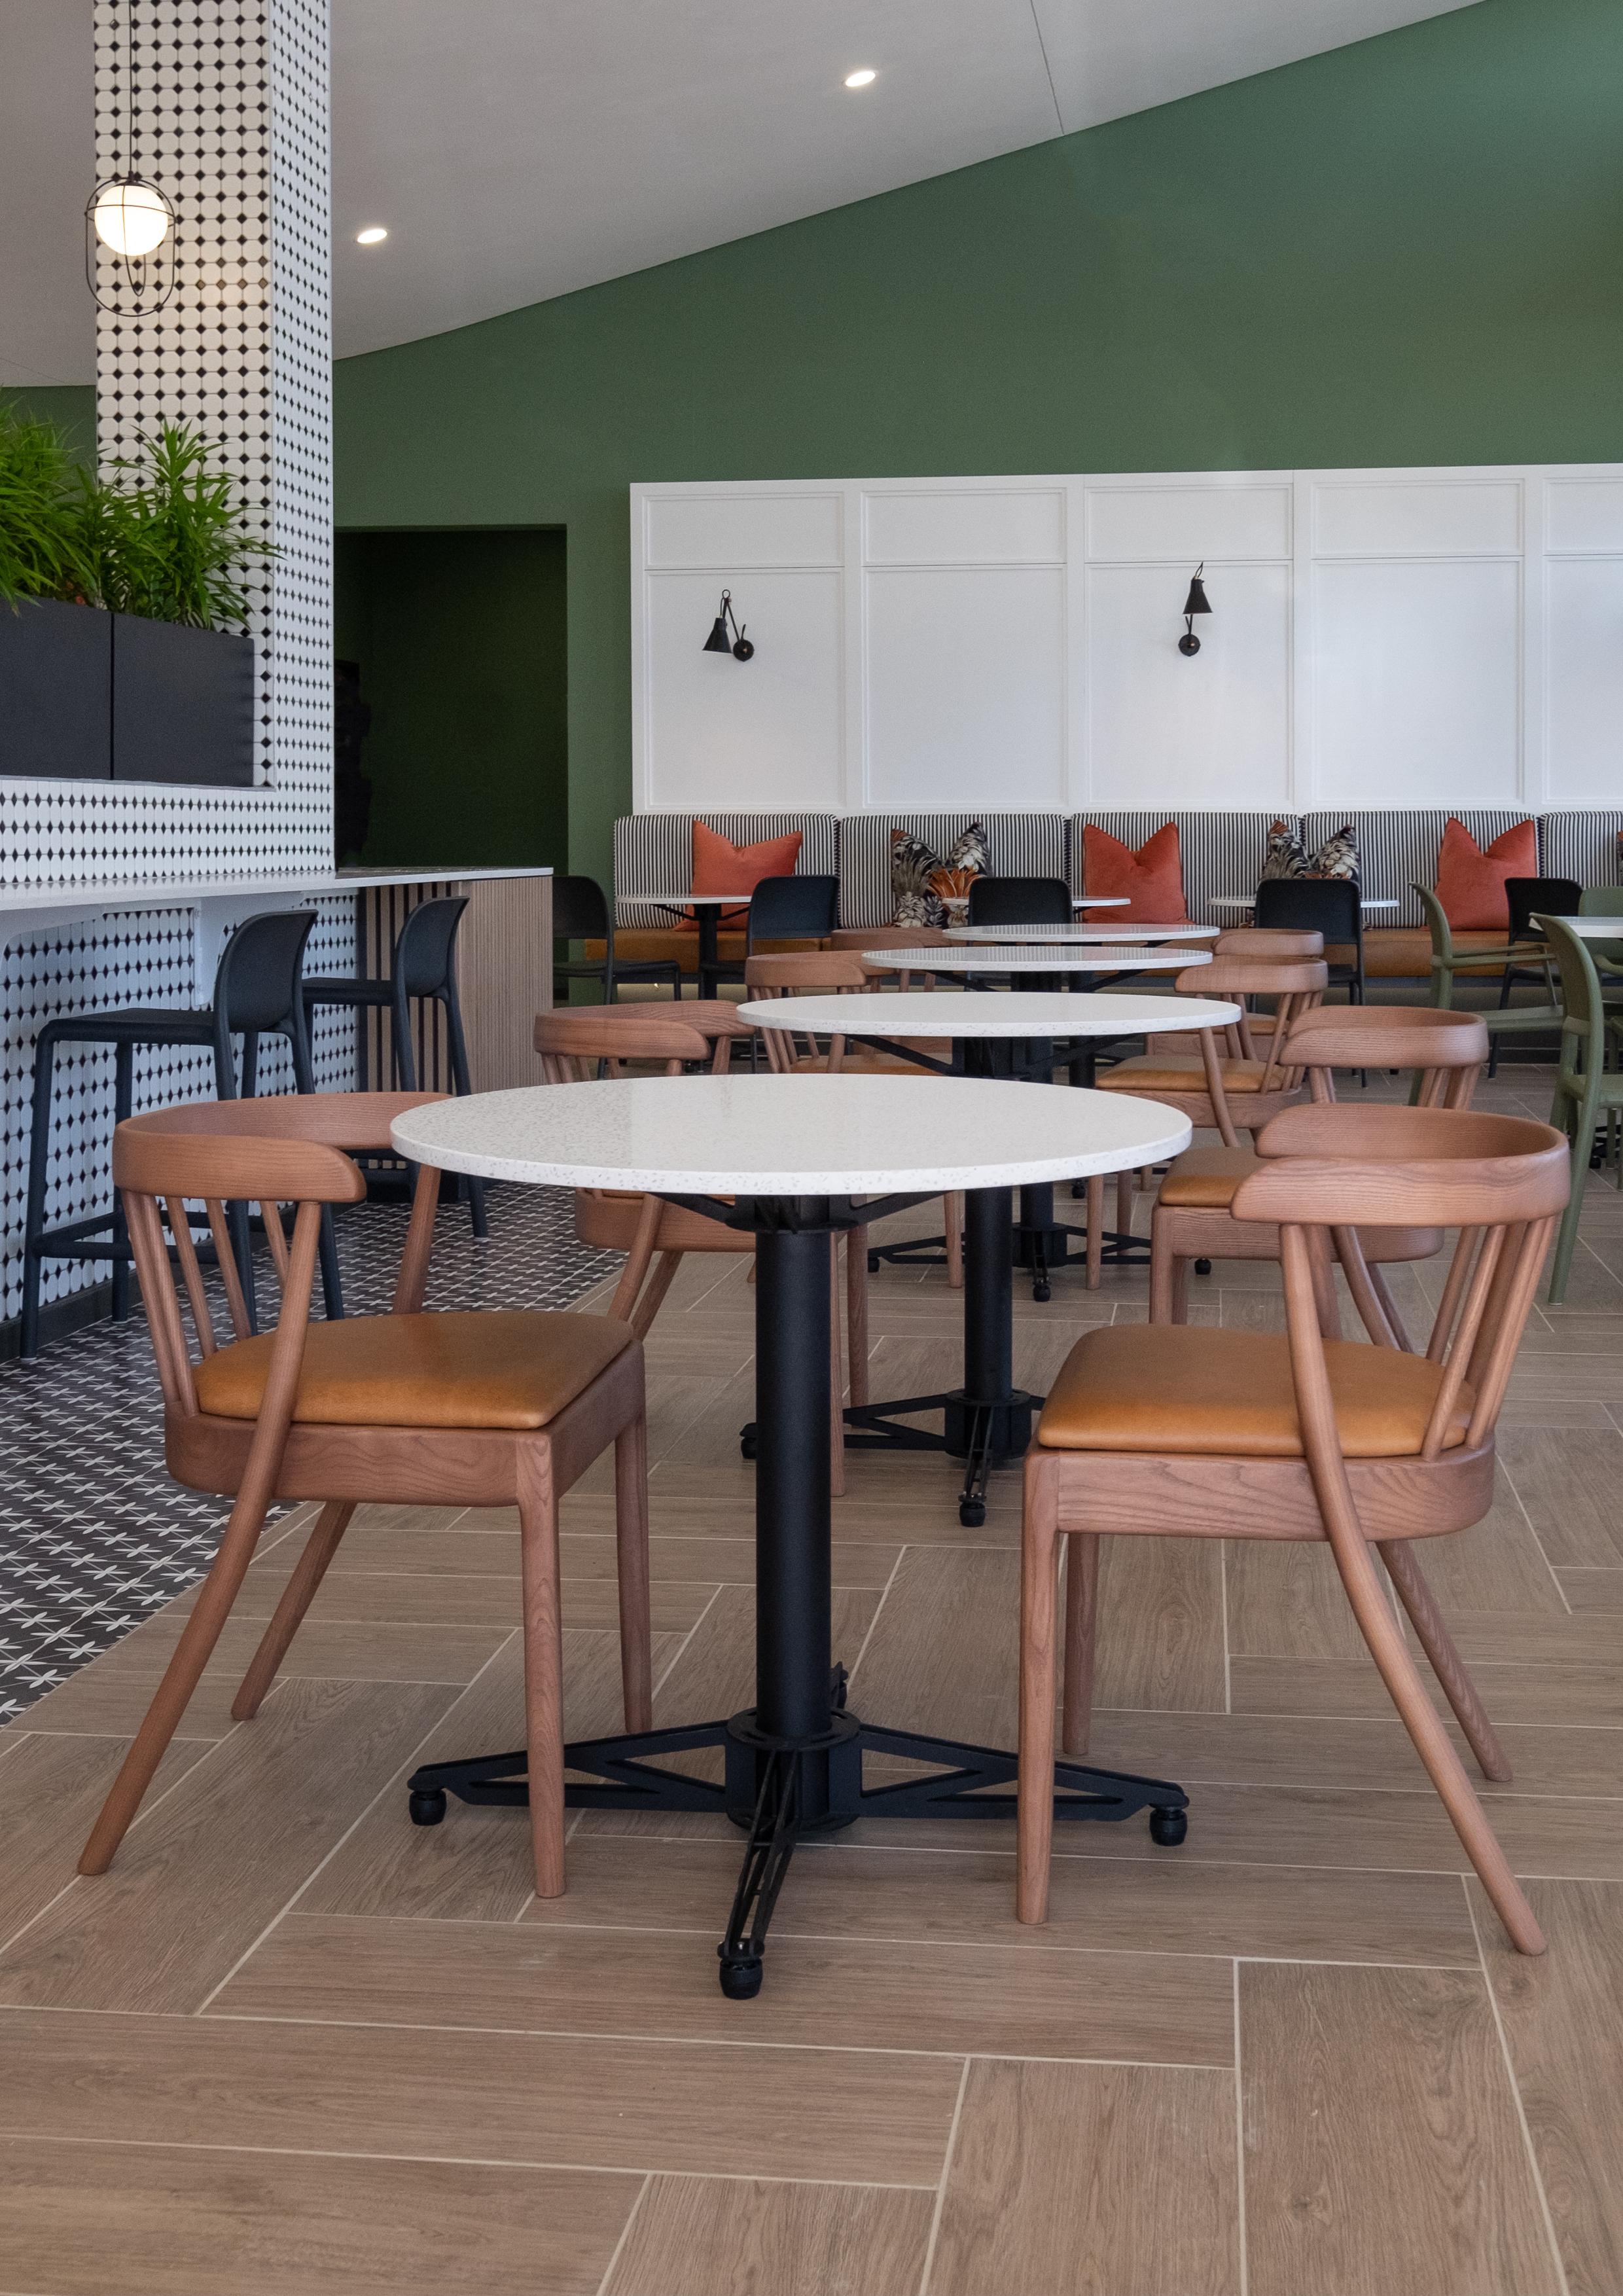 The Stable is a durable and functional table, designed with stability in mind, for you to dine, meet, work, sit, stand, play, do, create and so much more.

This table base is paired with amazing FLAT® Equalizer technology to effortlessly stabilize,